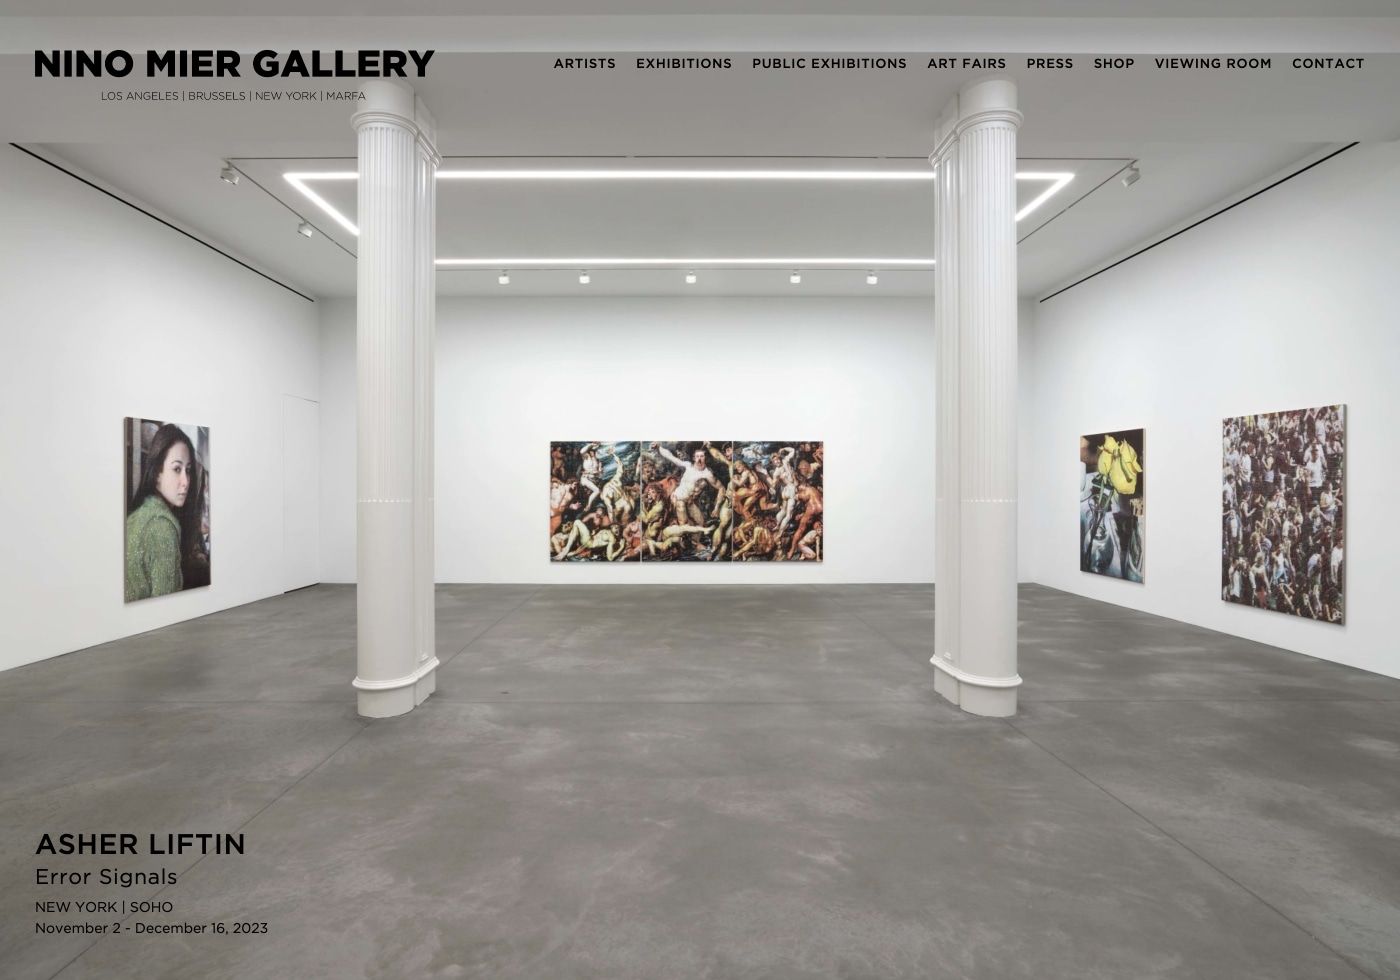 Mier Gallery